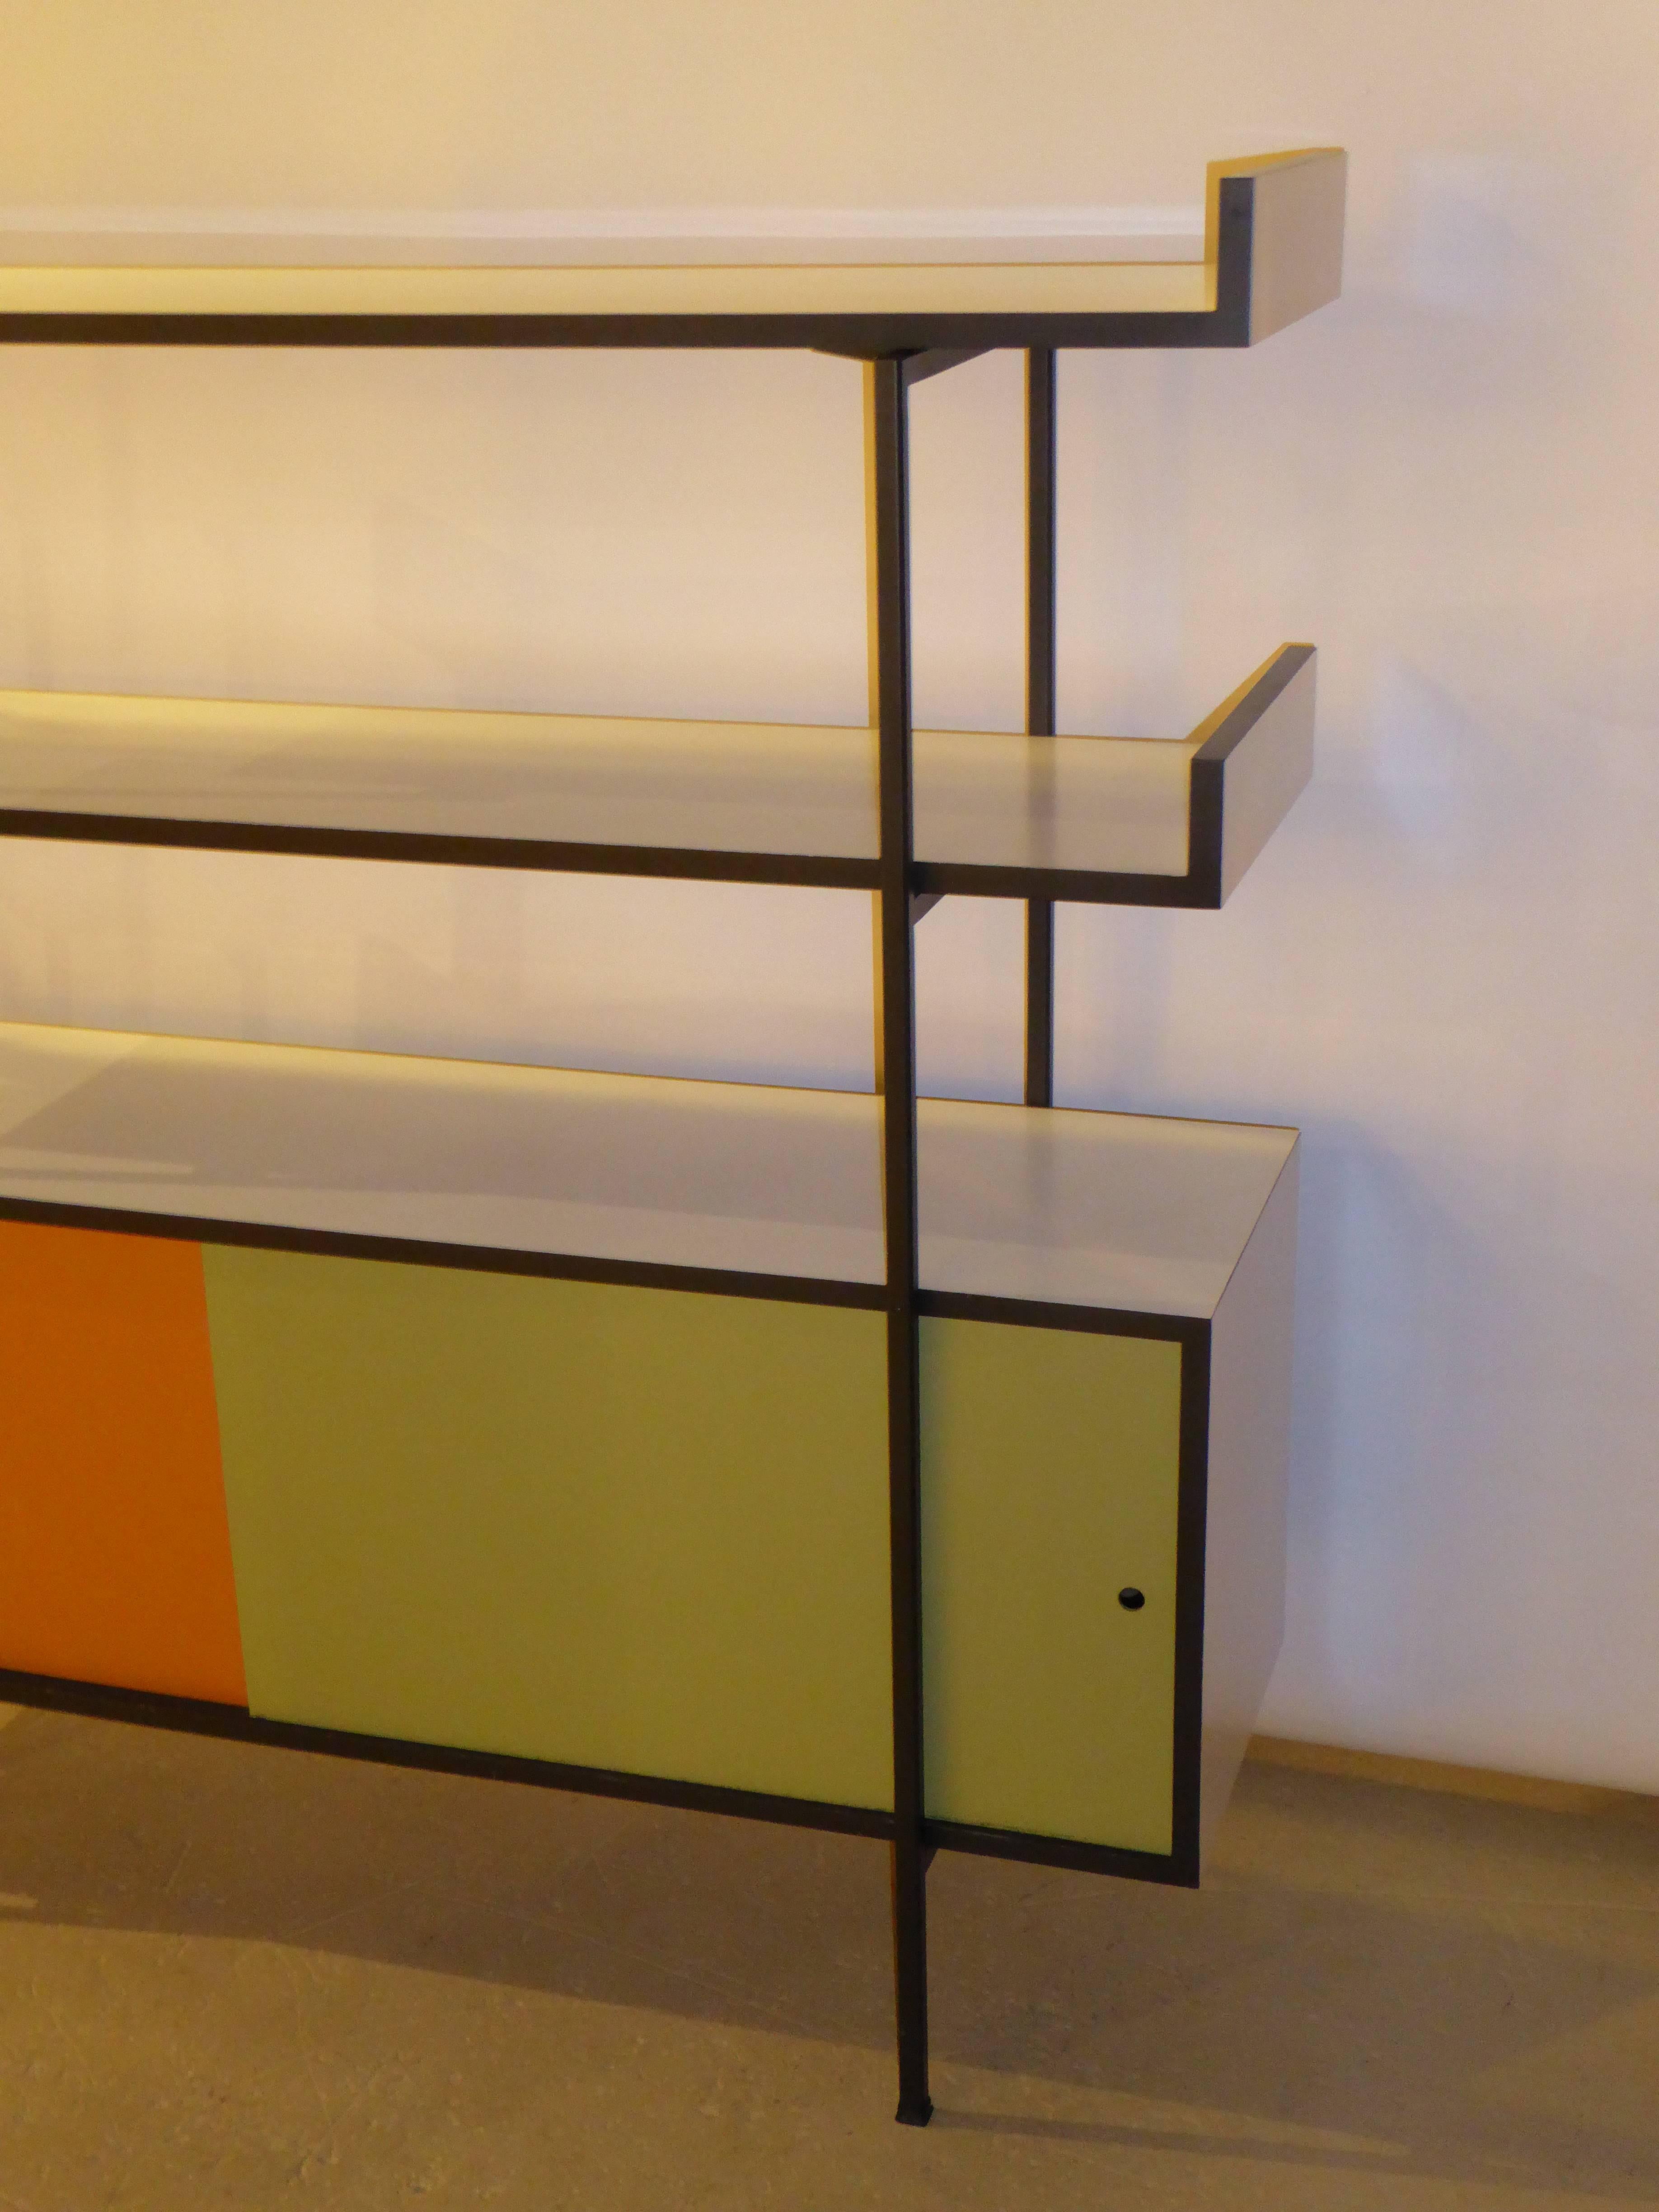 Mid-20th Century 1950s Credenza Shelves Room Divider in the Manner of Paul McCobb